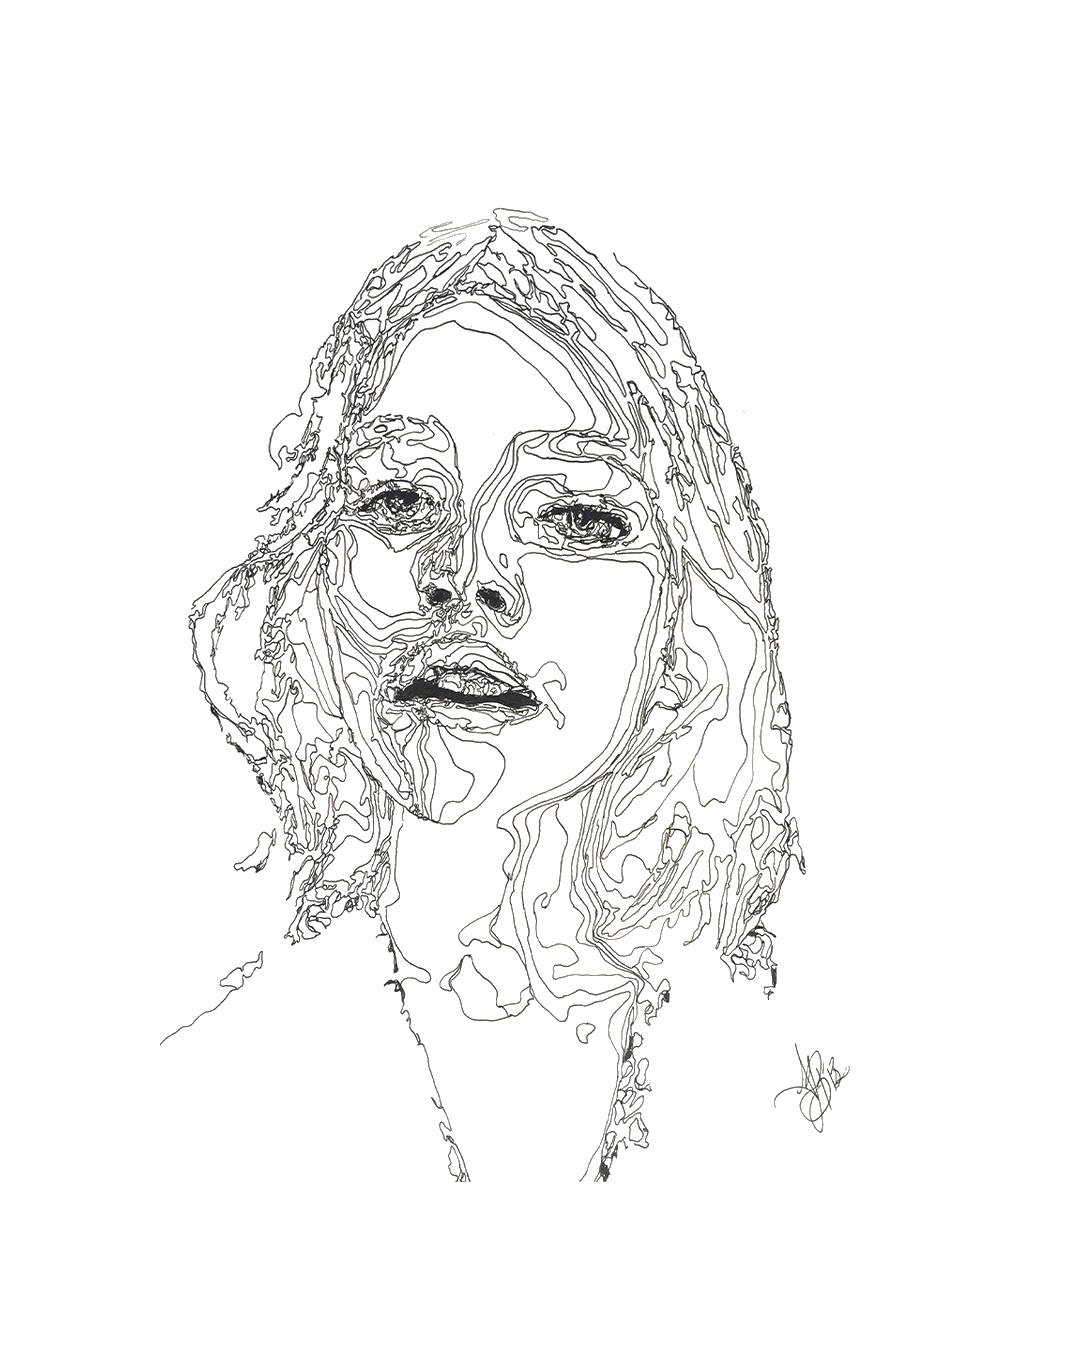 pen and ink visiography line art drawing of a woman named sarah